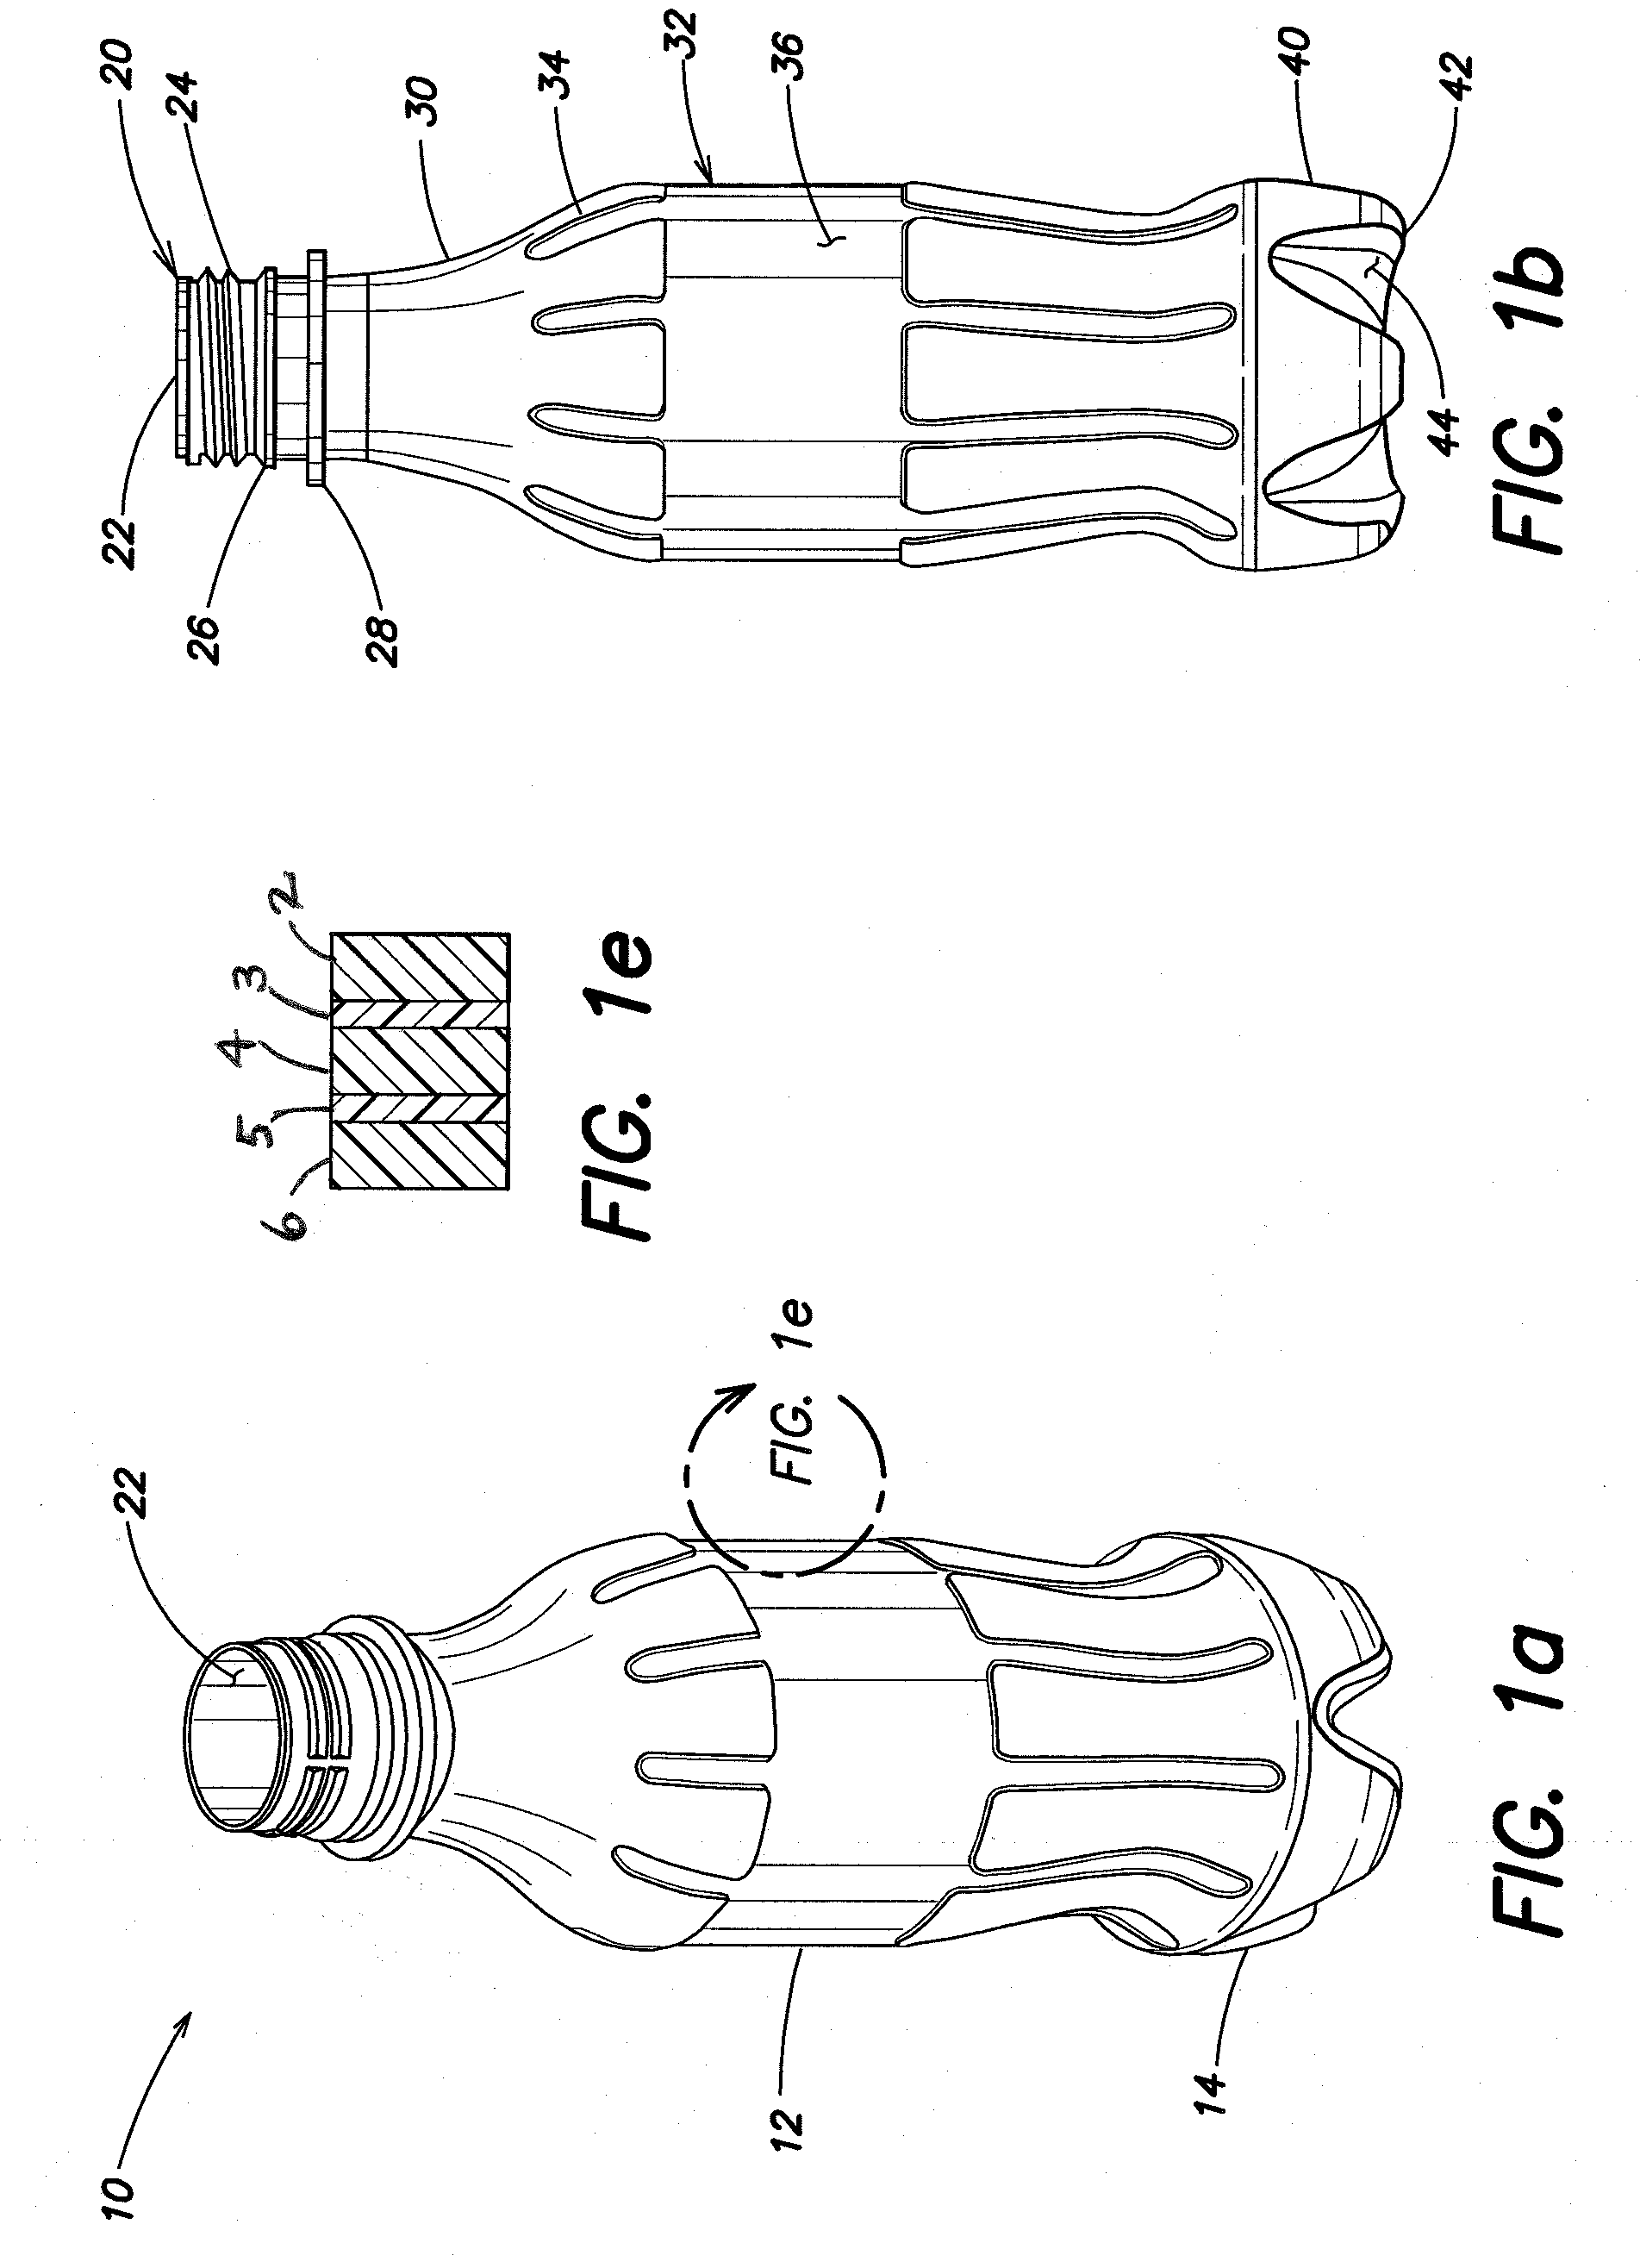 Preform Base and Method of Making a Delamination and Crack Resistant Multilayer Container Base